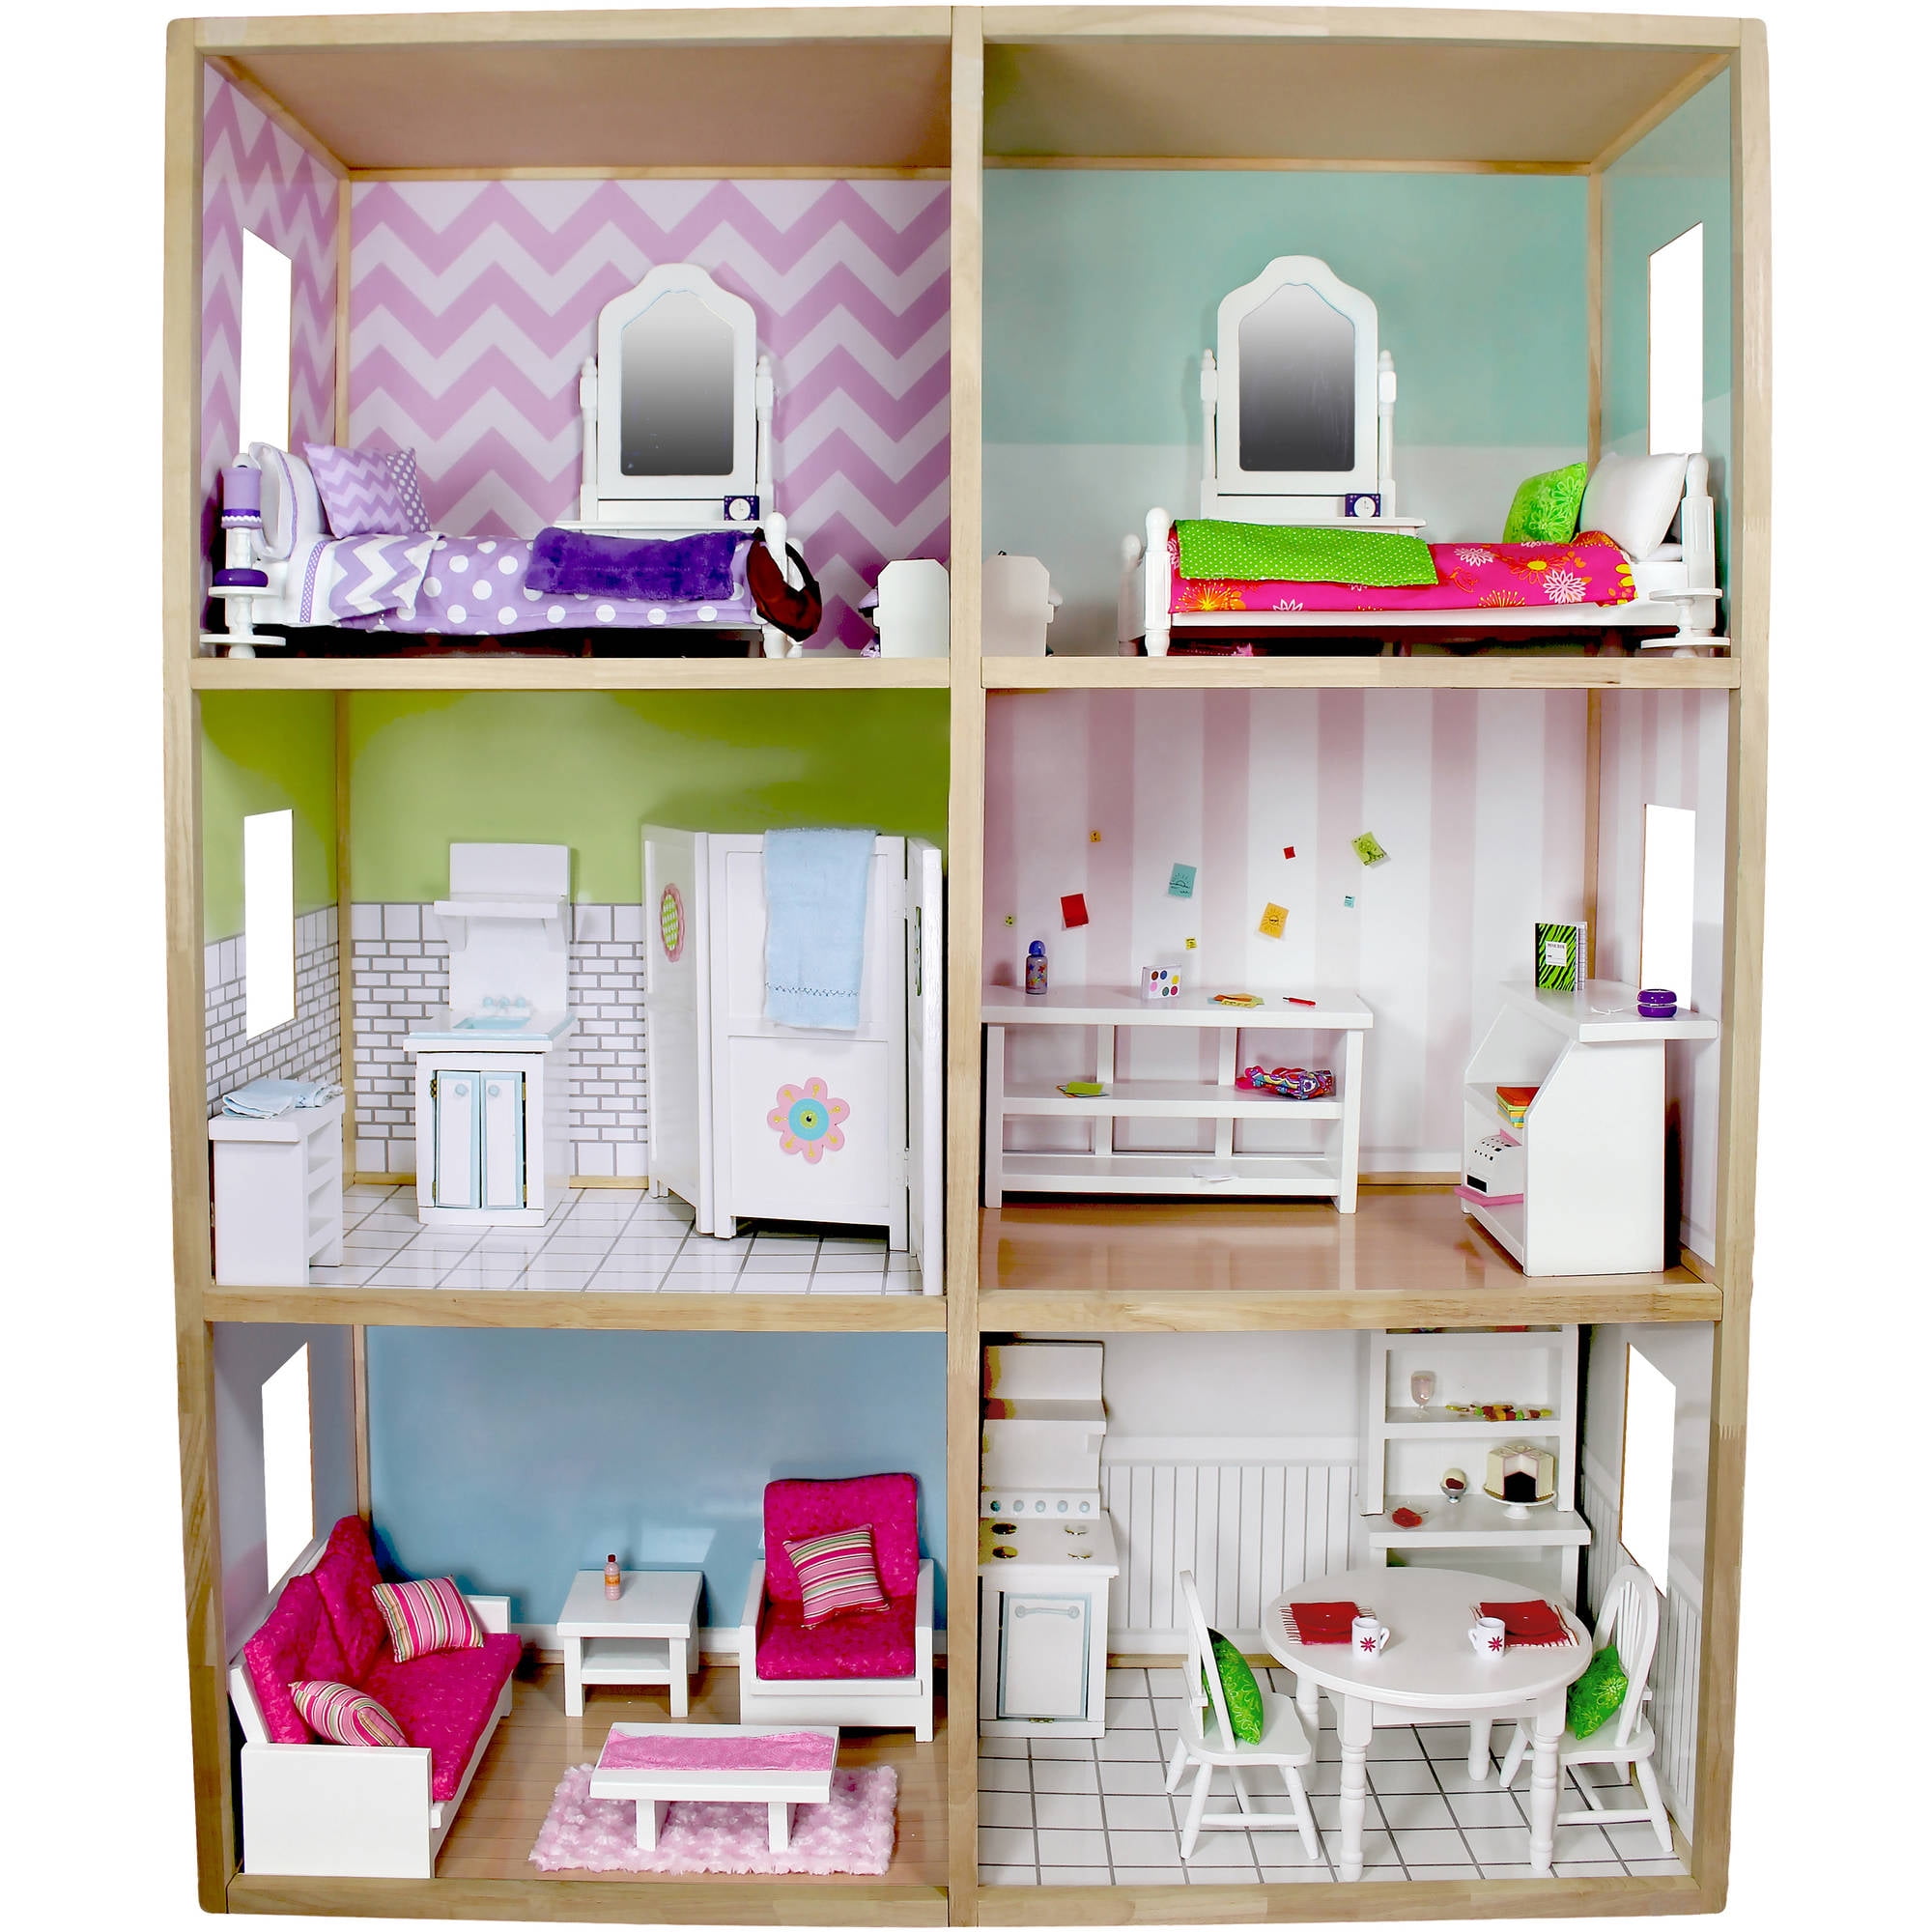 My Girl's Doll House Review (The perfect American Girl Doll House!) -  Living Chic Mom